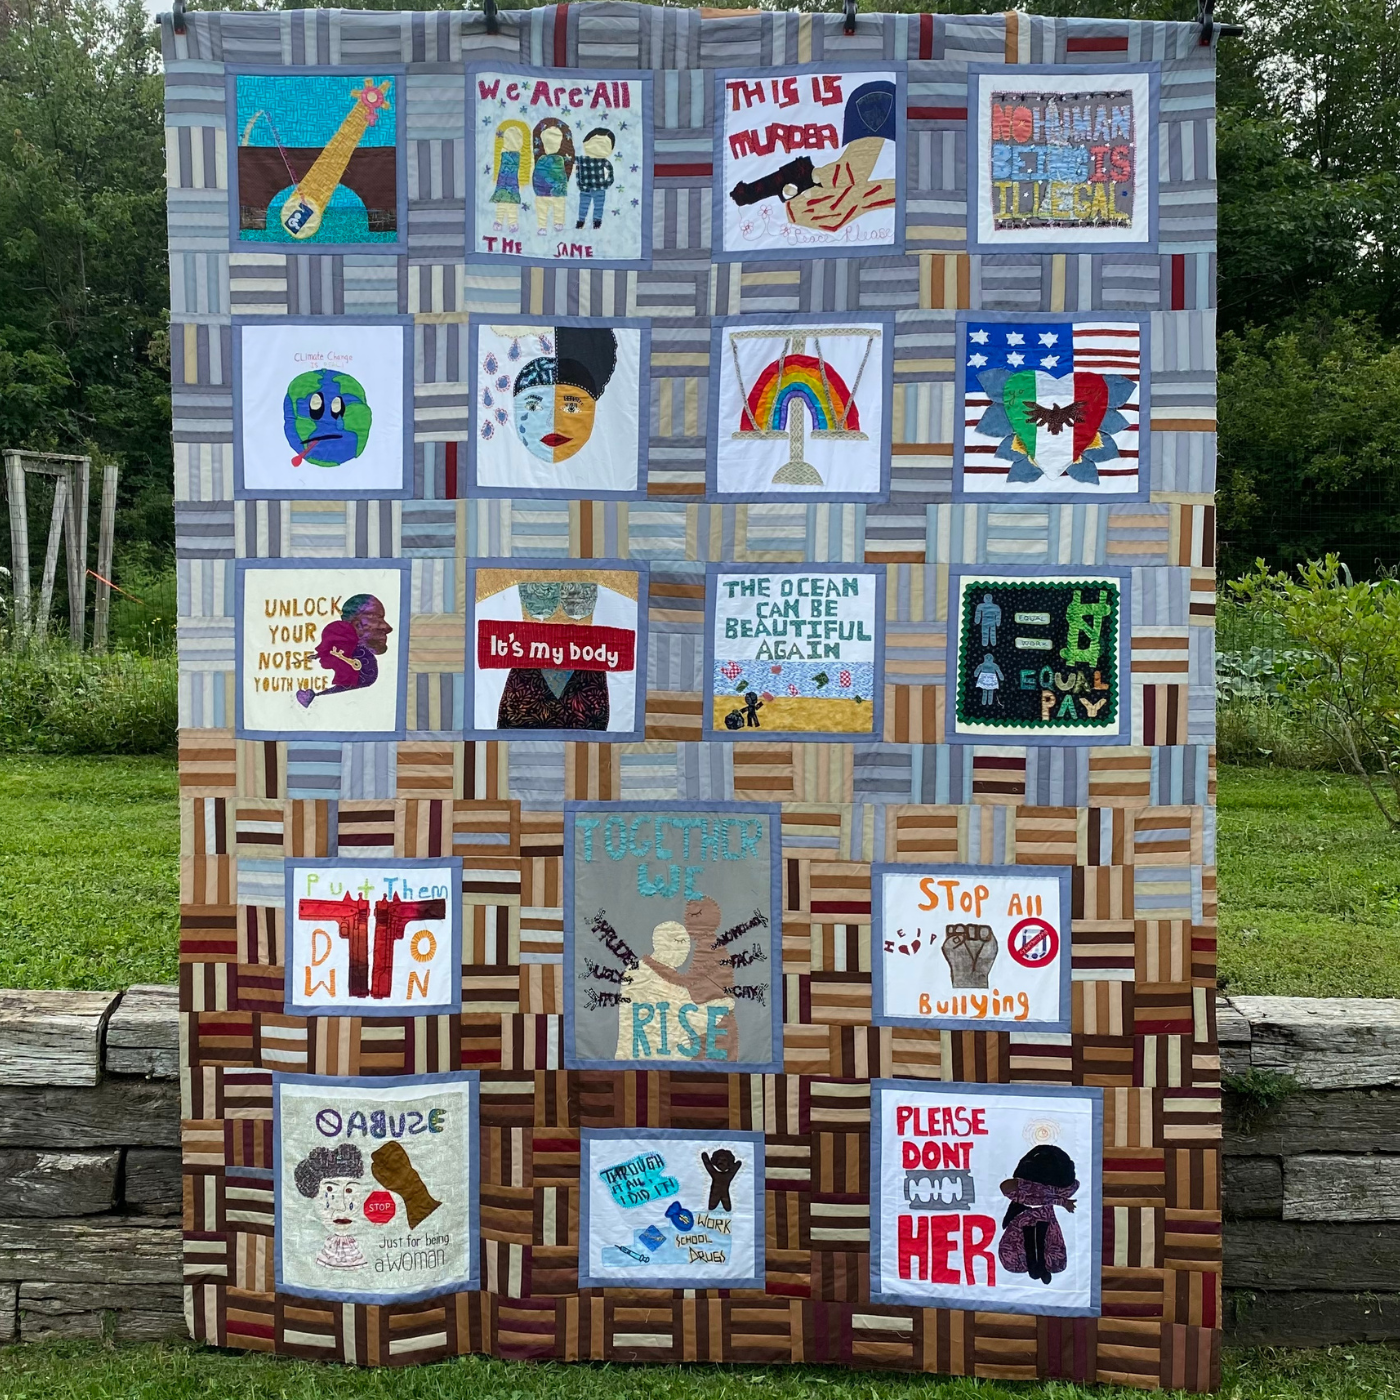 A full size quilt is on display in front a low rock wall with a grassy field behind it. There are 19 quilt blocks on the quilt, which has a gray background at the top and a brown background at the bottom. The blocks in the quilt cover a range of social justice issues from gay rights to ending gun violence to environmental issues to ending genital mutilation and more.